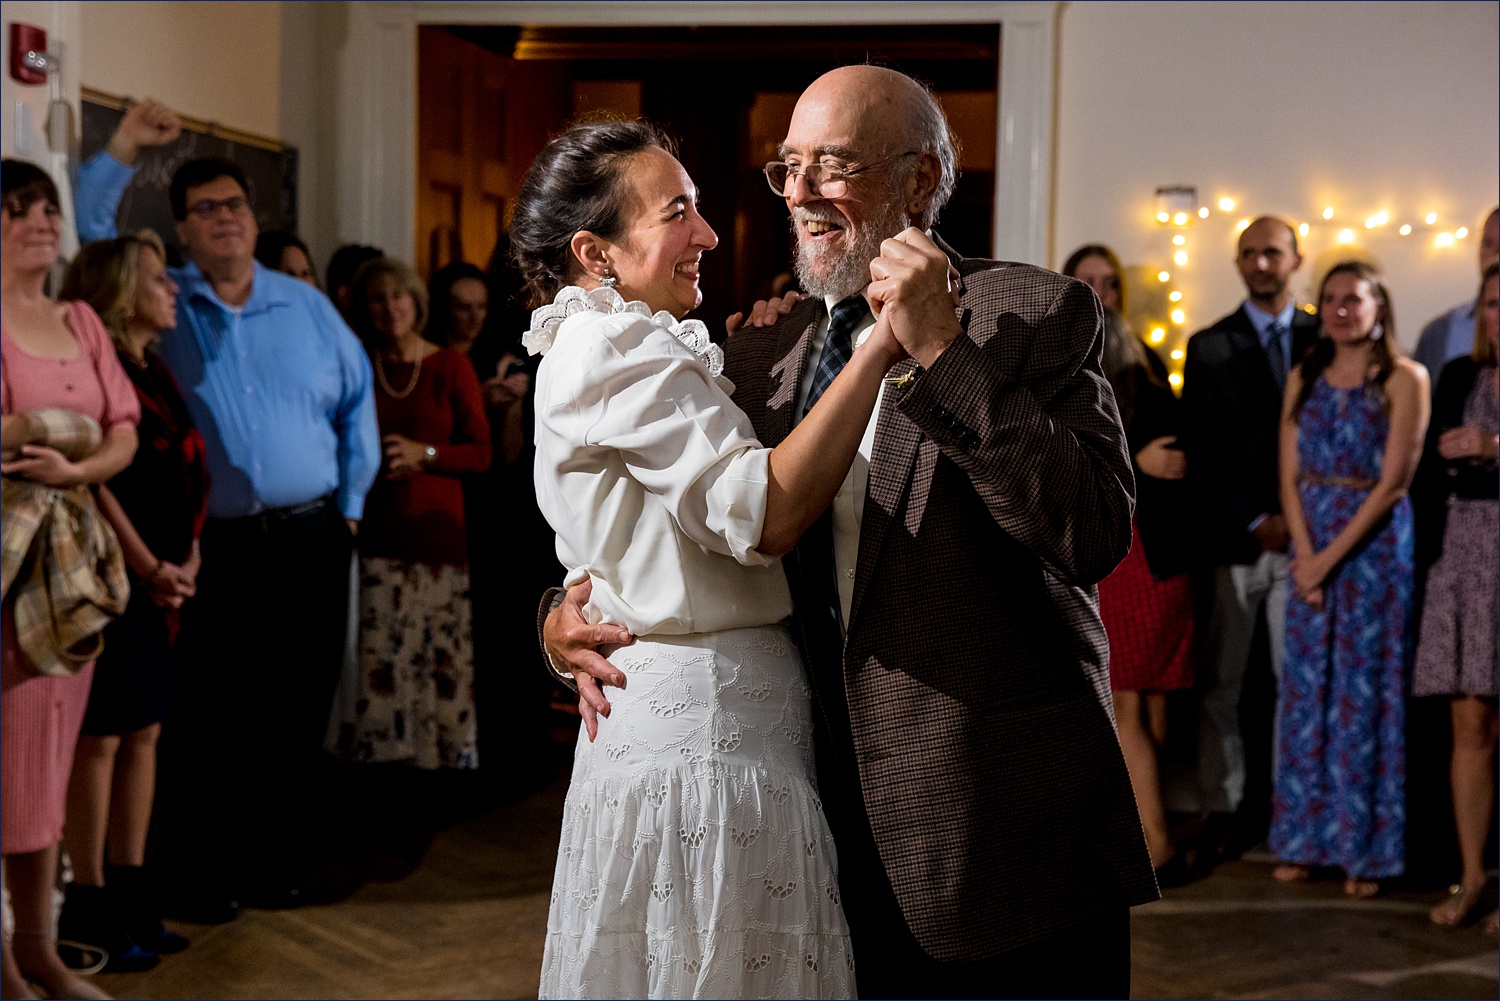 Bride and father dance at the wedding reception at College of the Atlantic